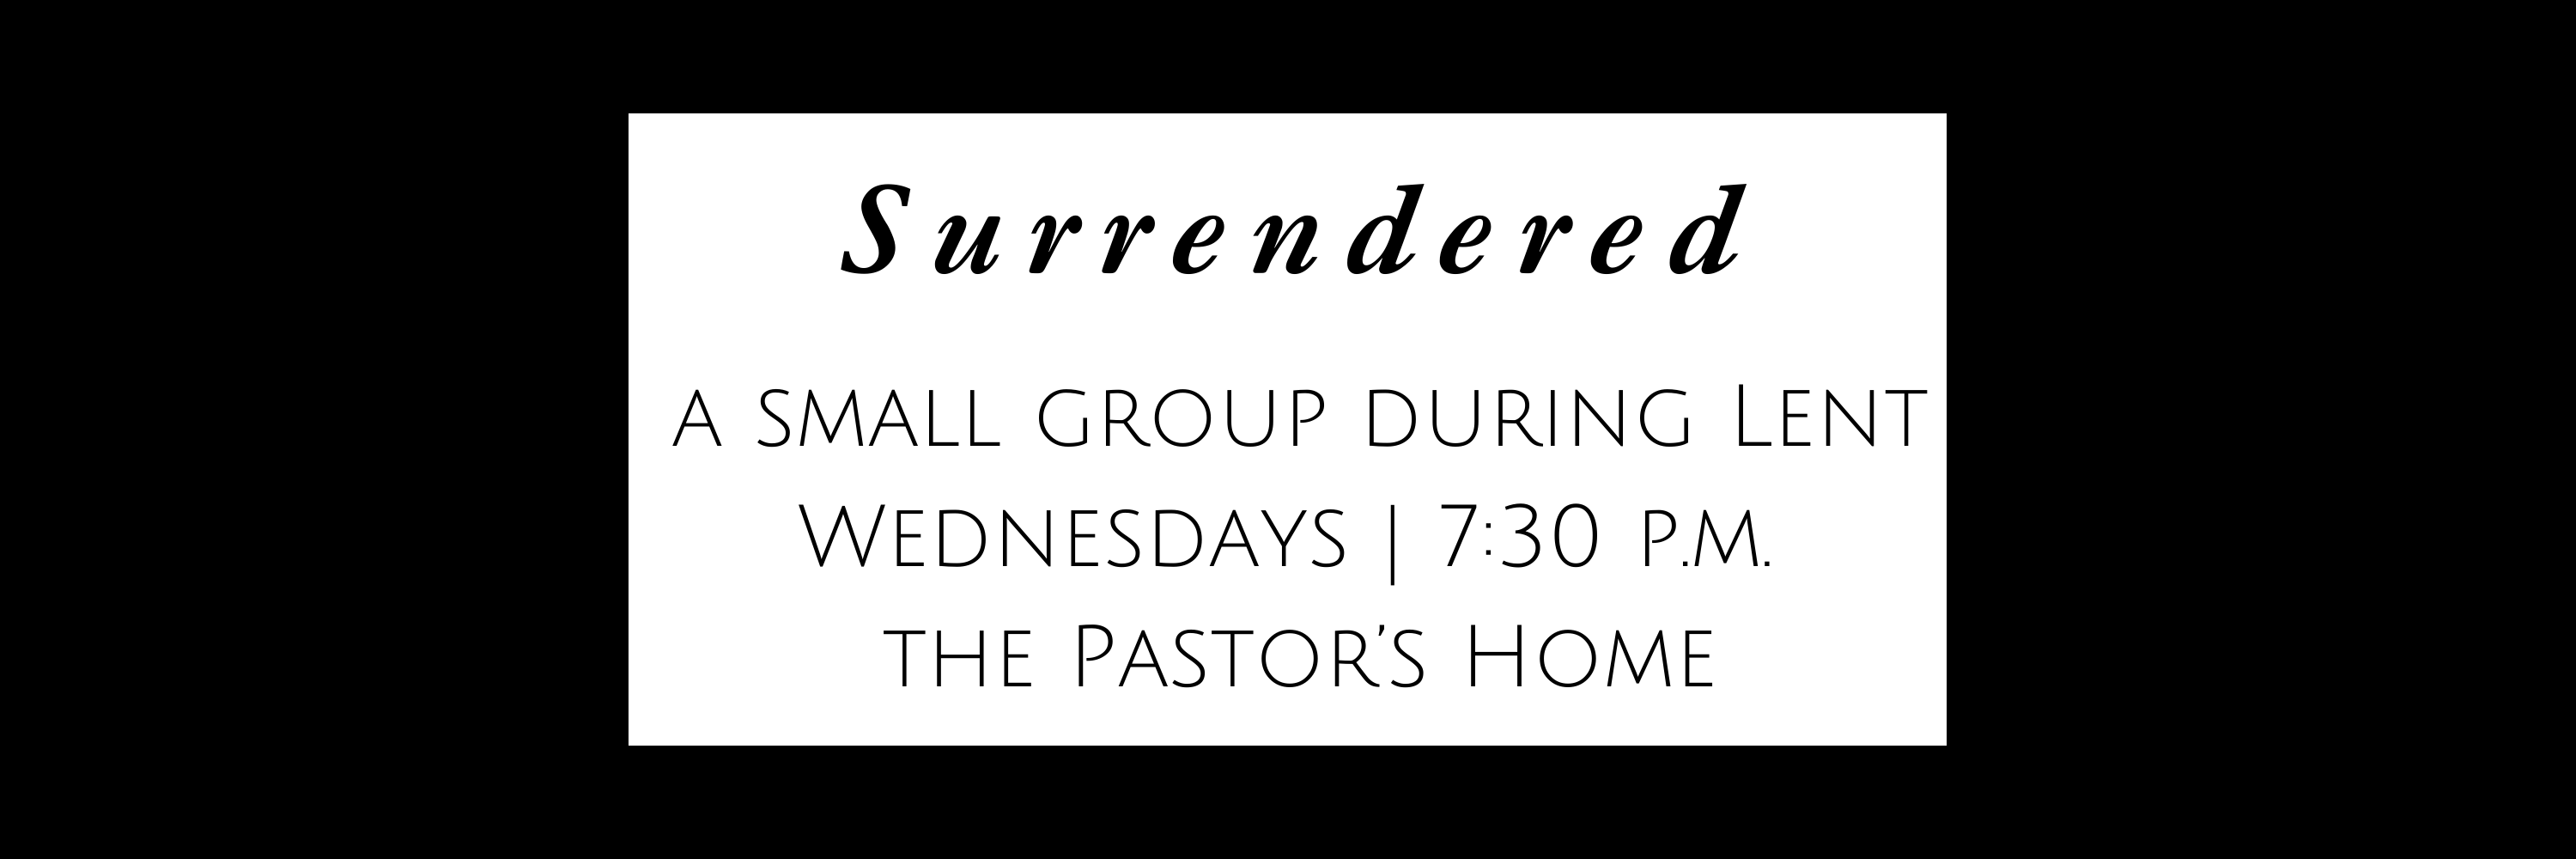 Surrendered a small group during Lent 730 p.m. Wednesday evenings the Pastors Home